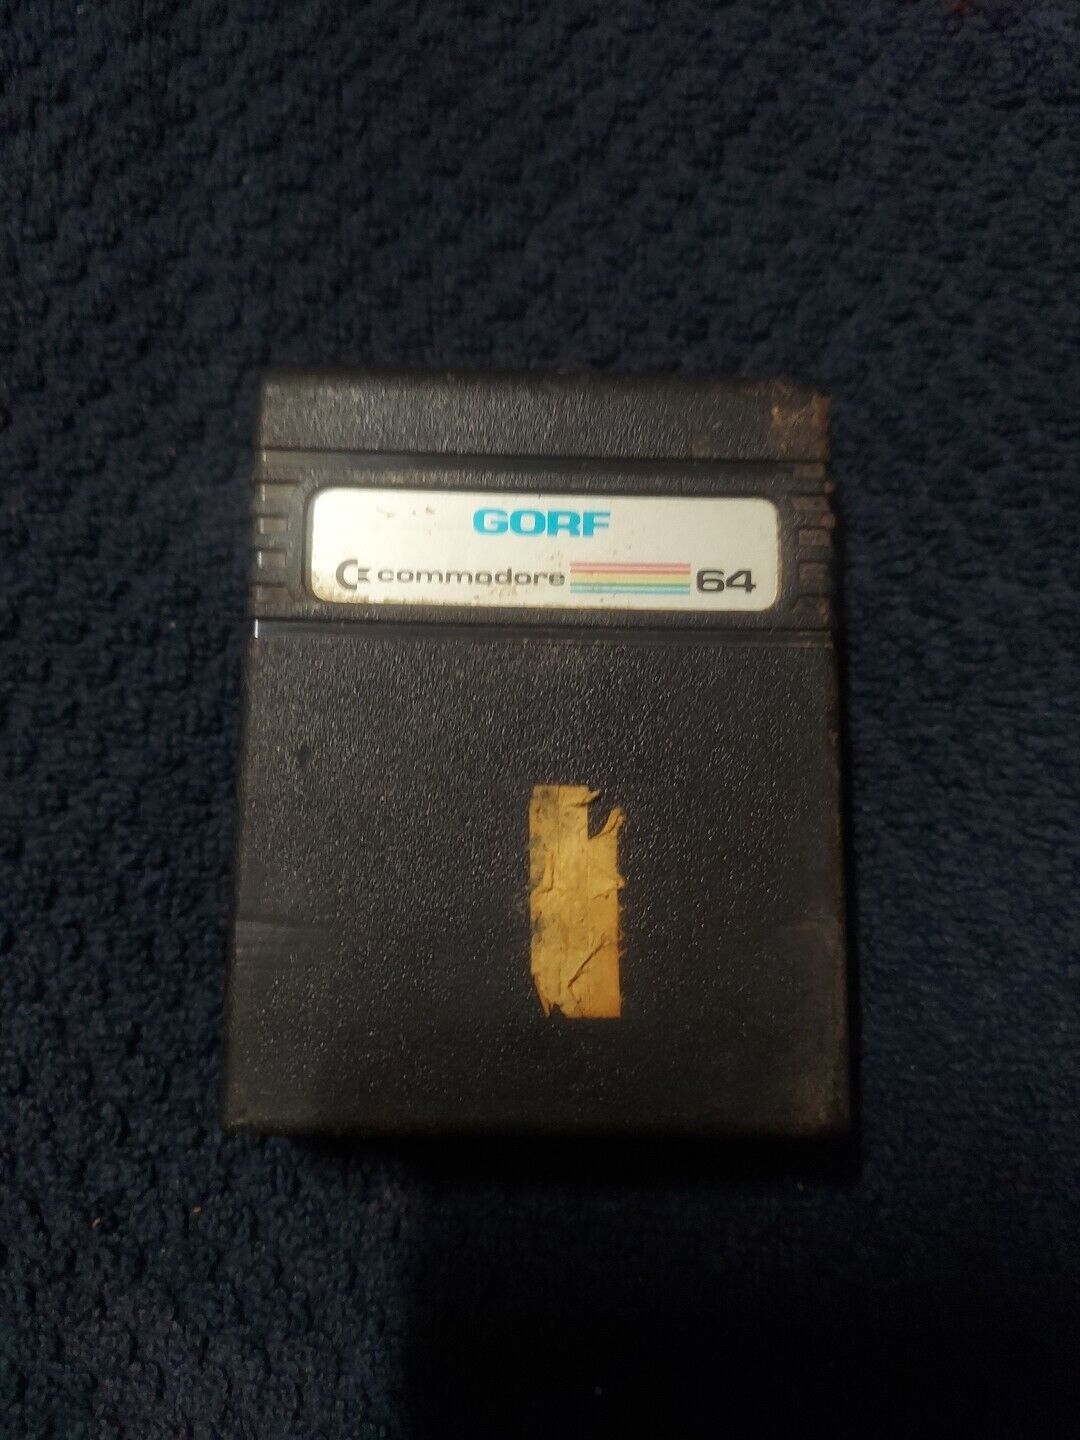 Commodore 64 Gorf Game Cartridge by Commodore (UNTESTED)